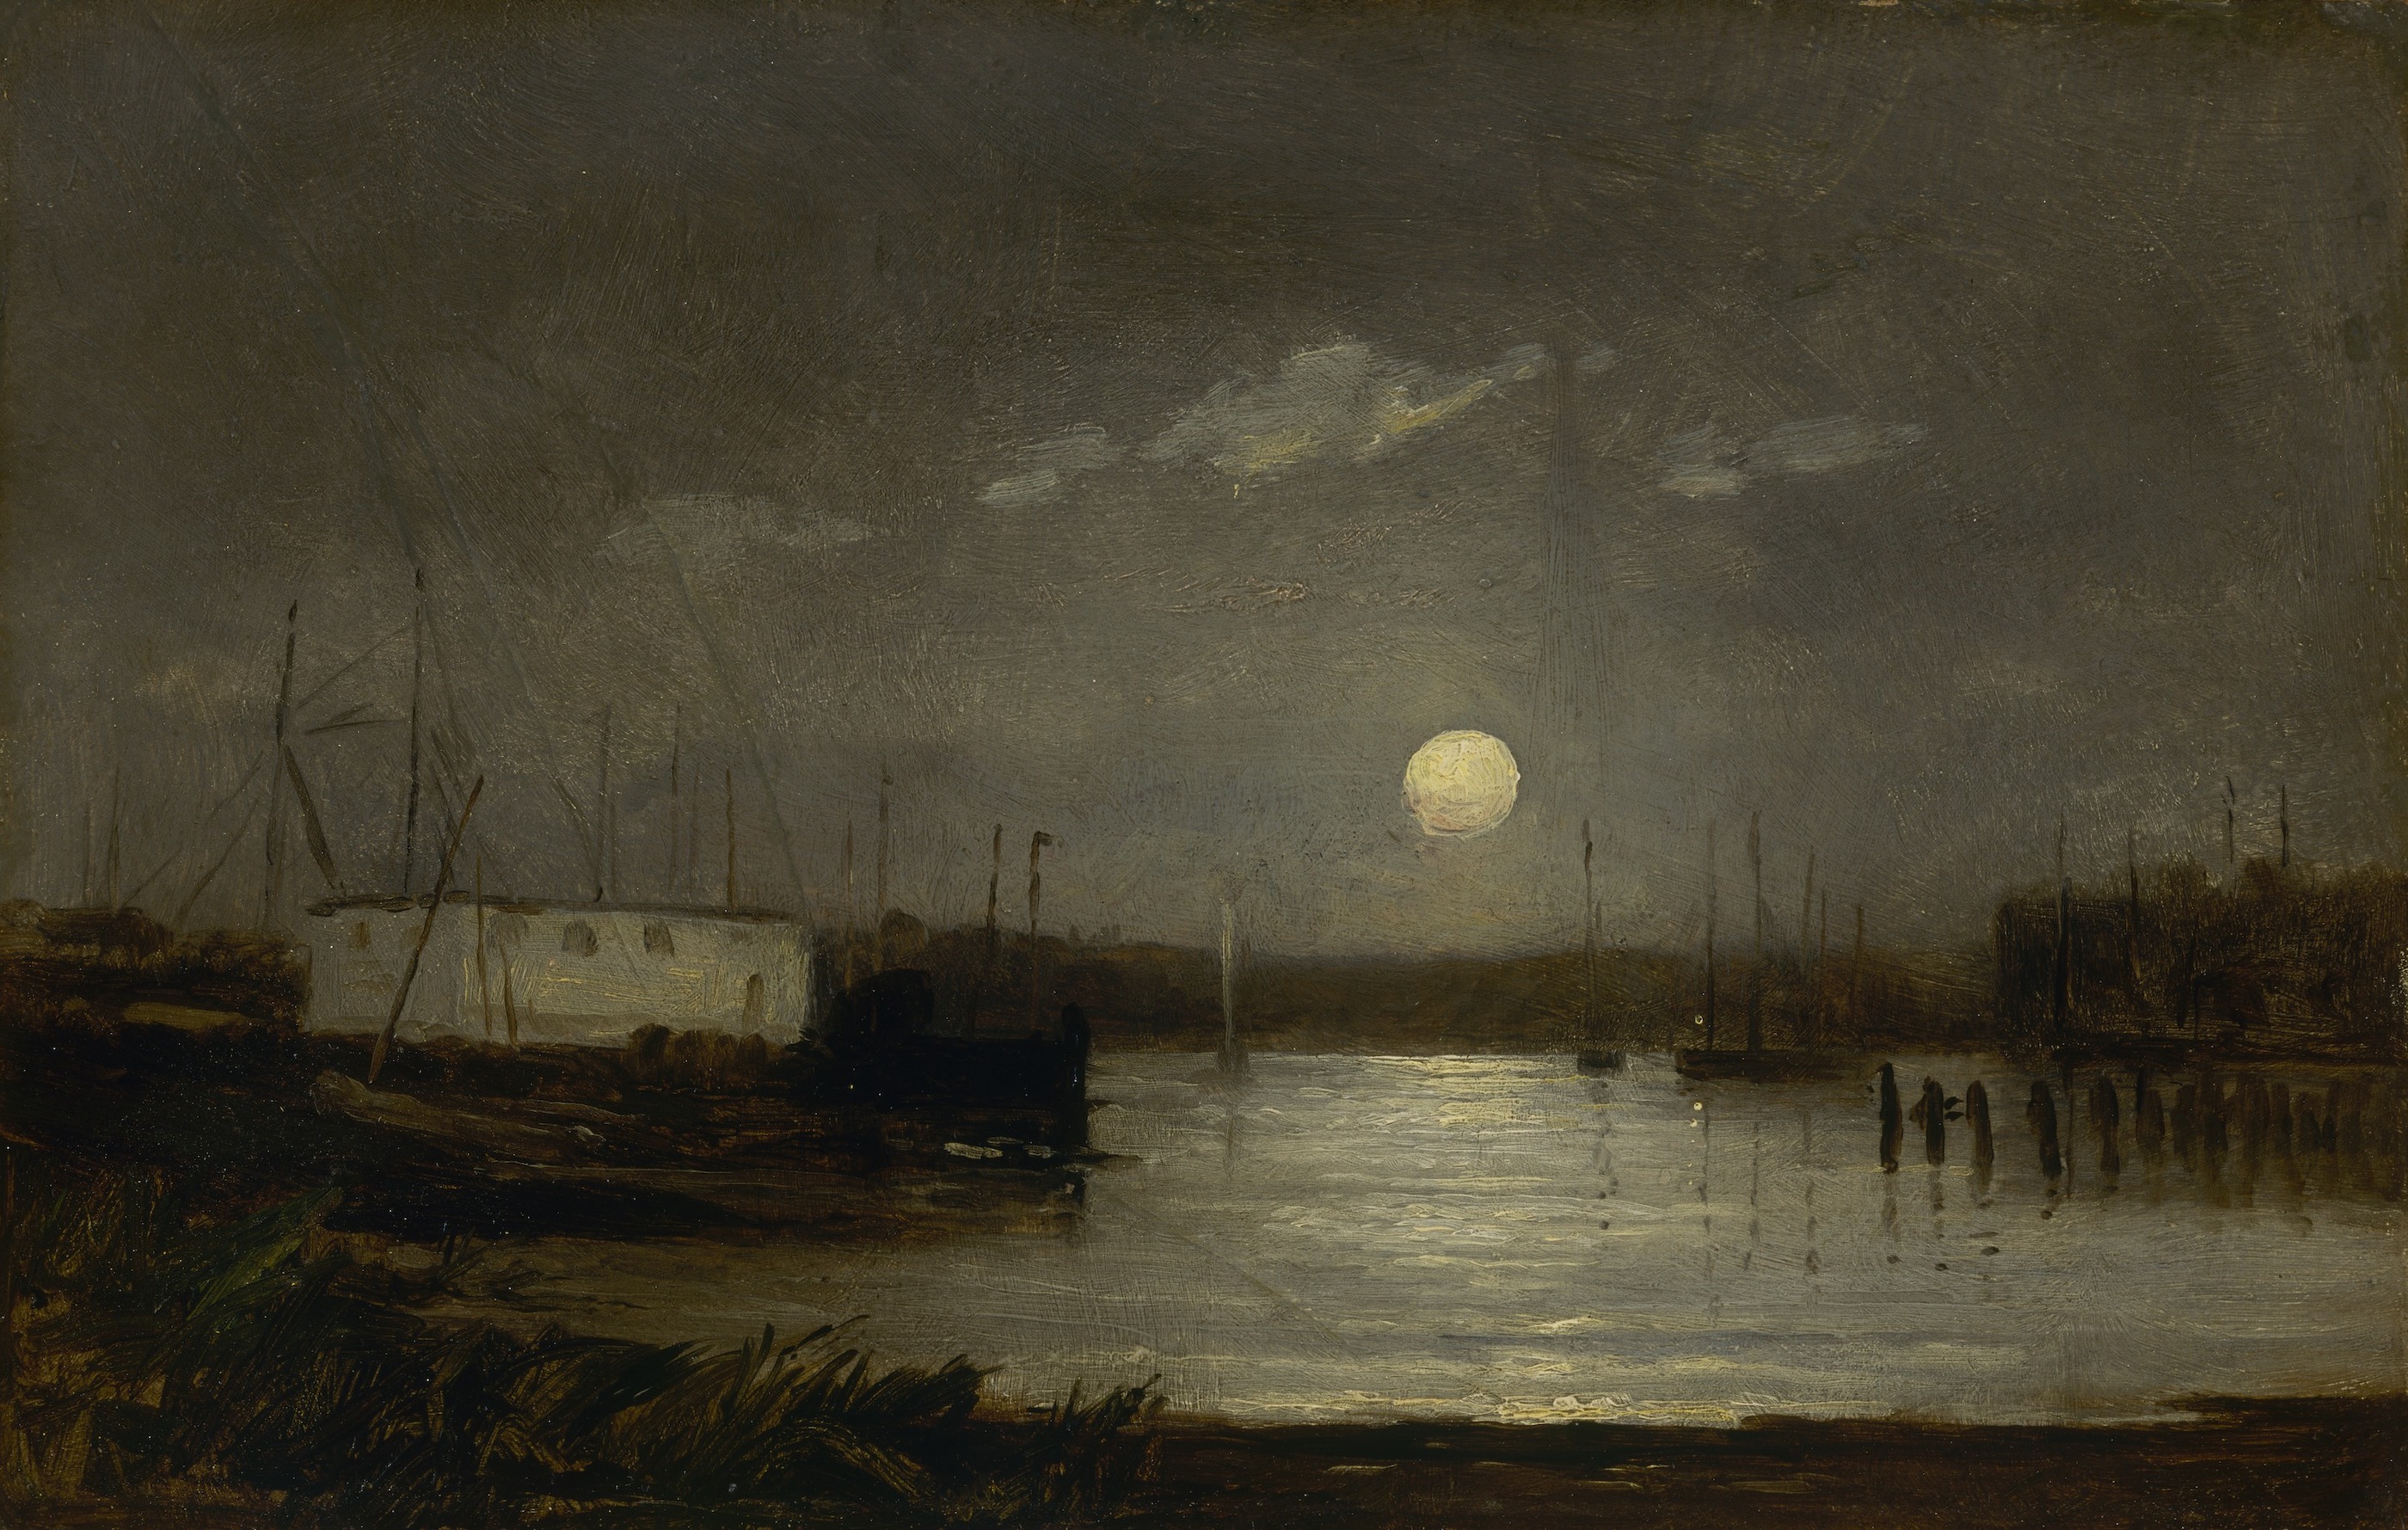 Untitled by Edward Mitchell Bannister - c. 1868 - 24.5 x 38.7 cm Smithsonian American Art Museum